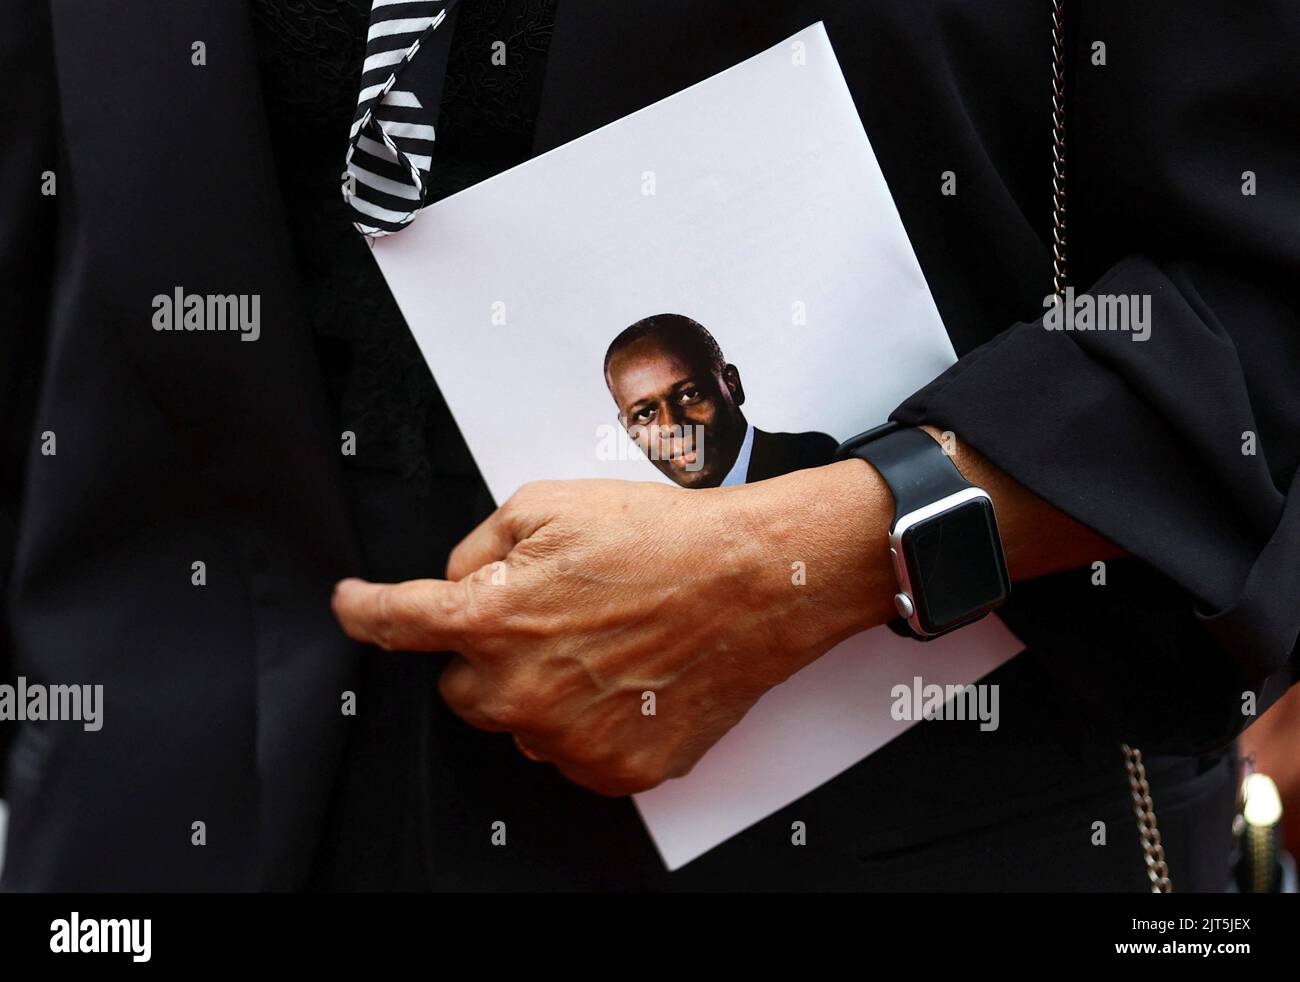 A mourner arrives holding a funeral programme during the funeral of Angola's former President Jose Eduardo dos Santos, who died in Spain in July, at the Agostinho Neto Memorial, in Luanda, Angola, August 28, 2022. REUTERS/Siphiwe Sibeko Stock Photo